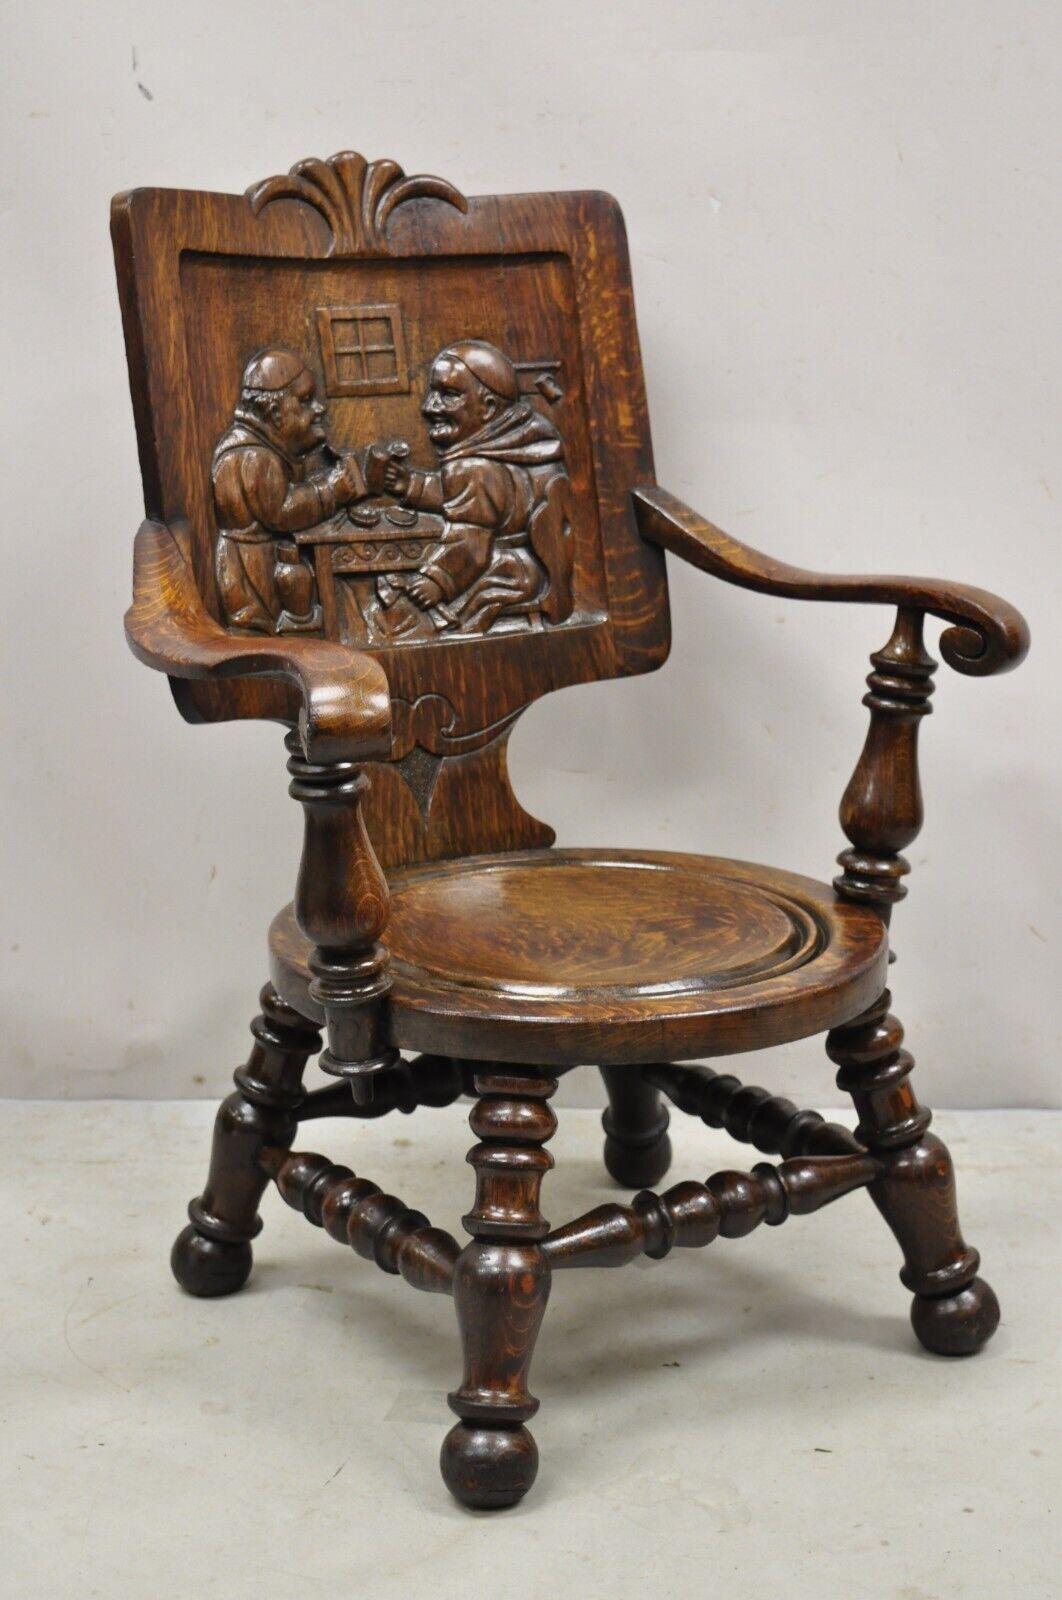 Antique English figural carved oak pub chair with monks in bar scene. Item features a scene of 2 monks drinking beer in the local pub, solid oak construction, beautiful wood grain, nicely carved details, very nice antique item. Originally was a